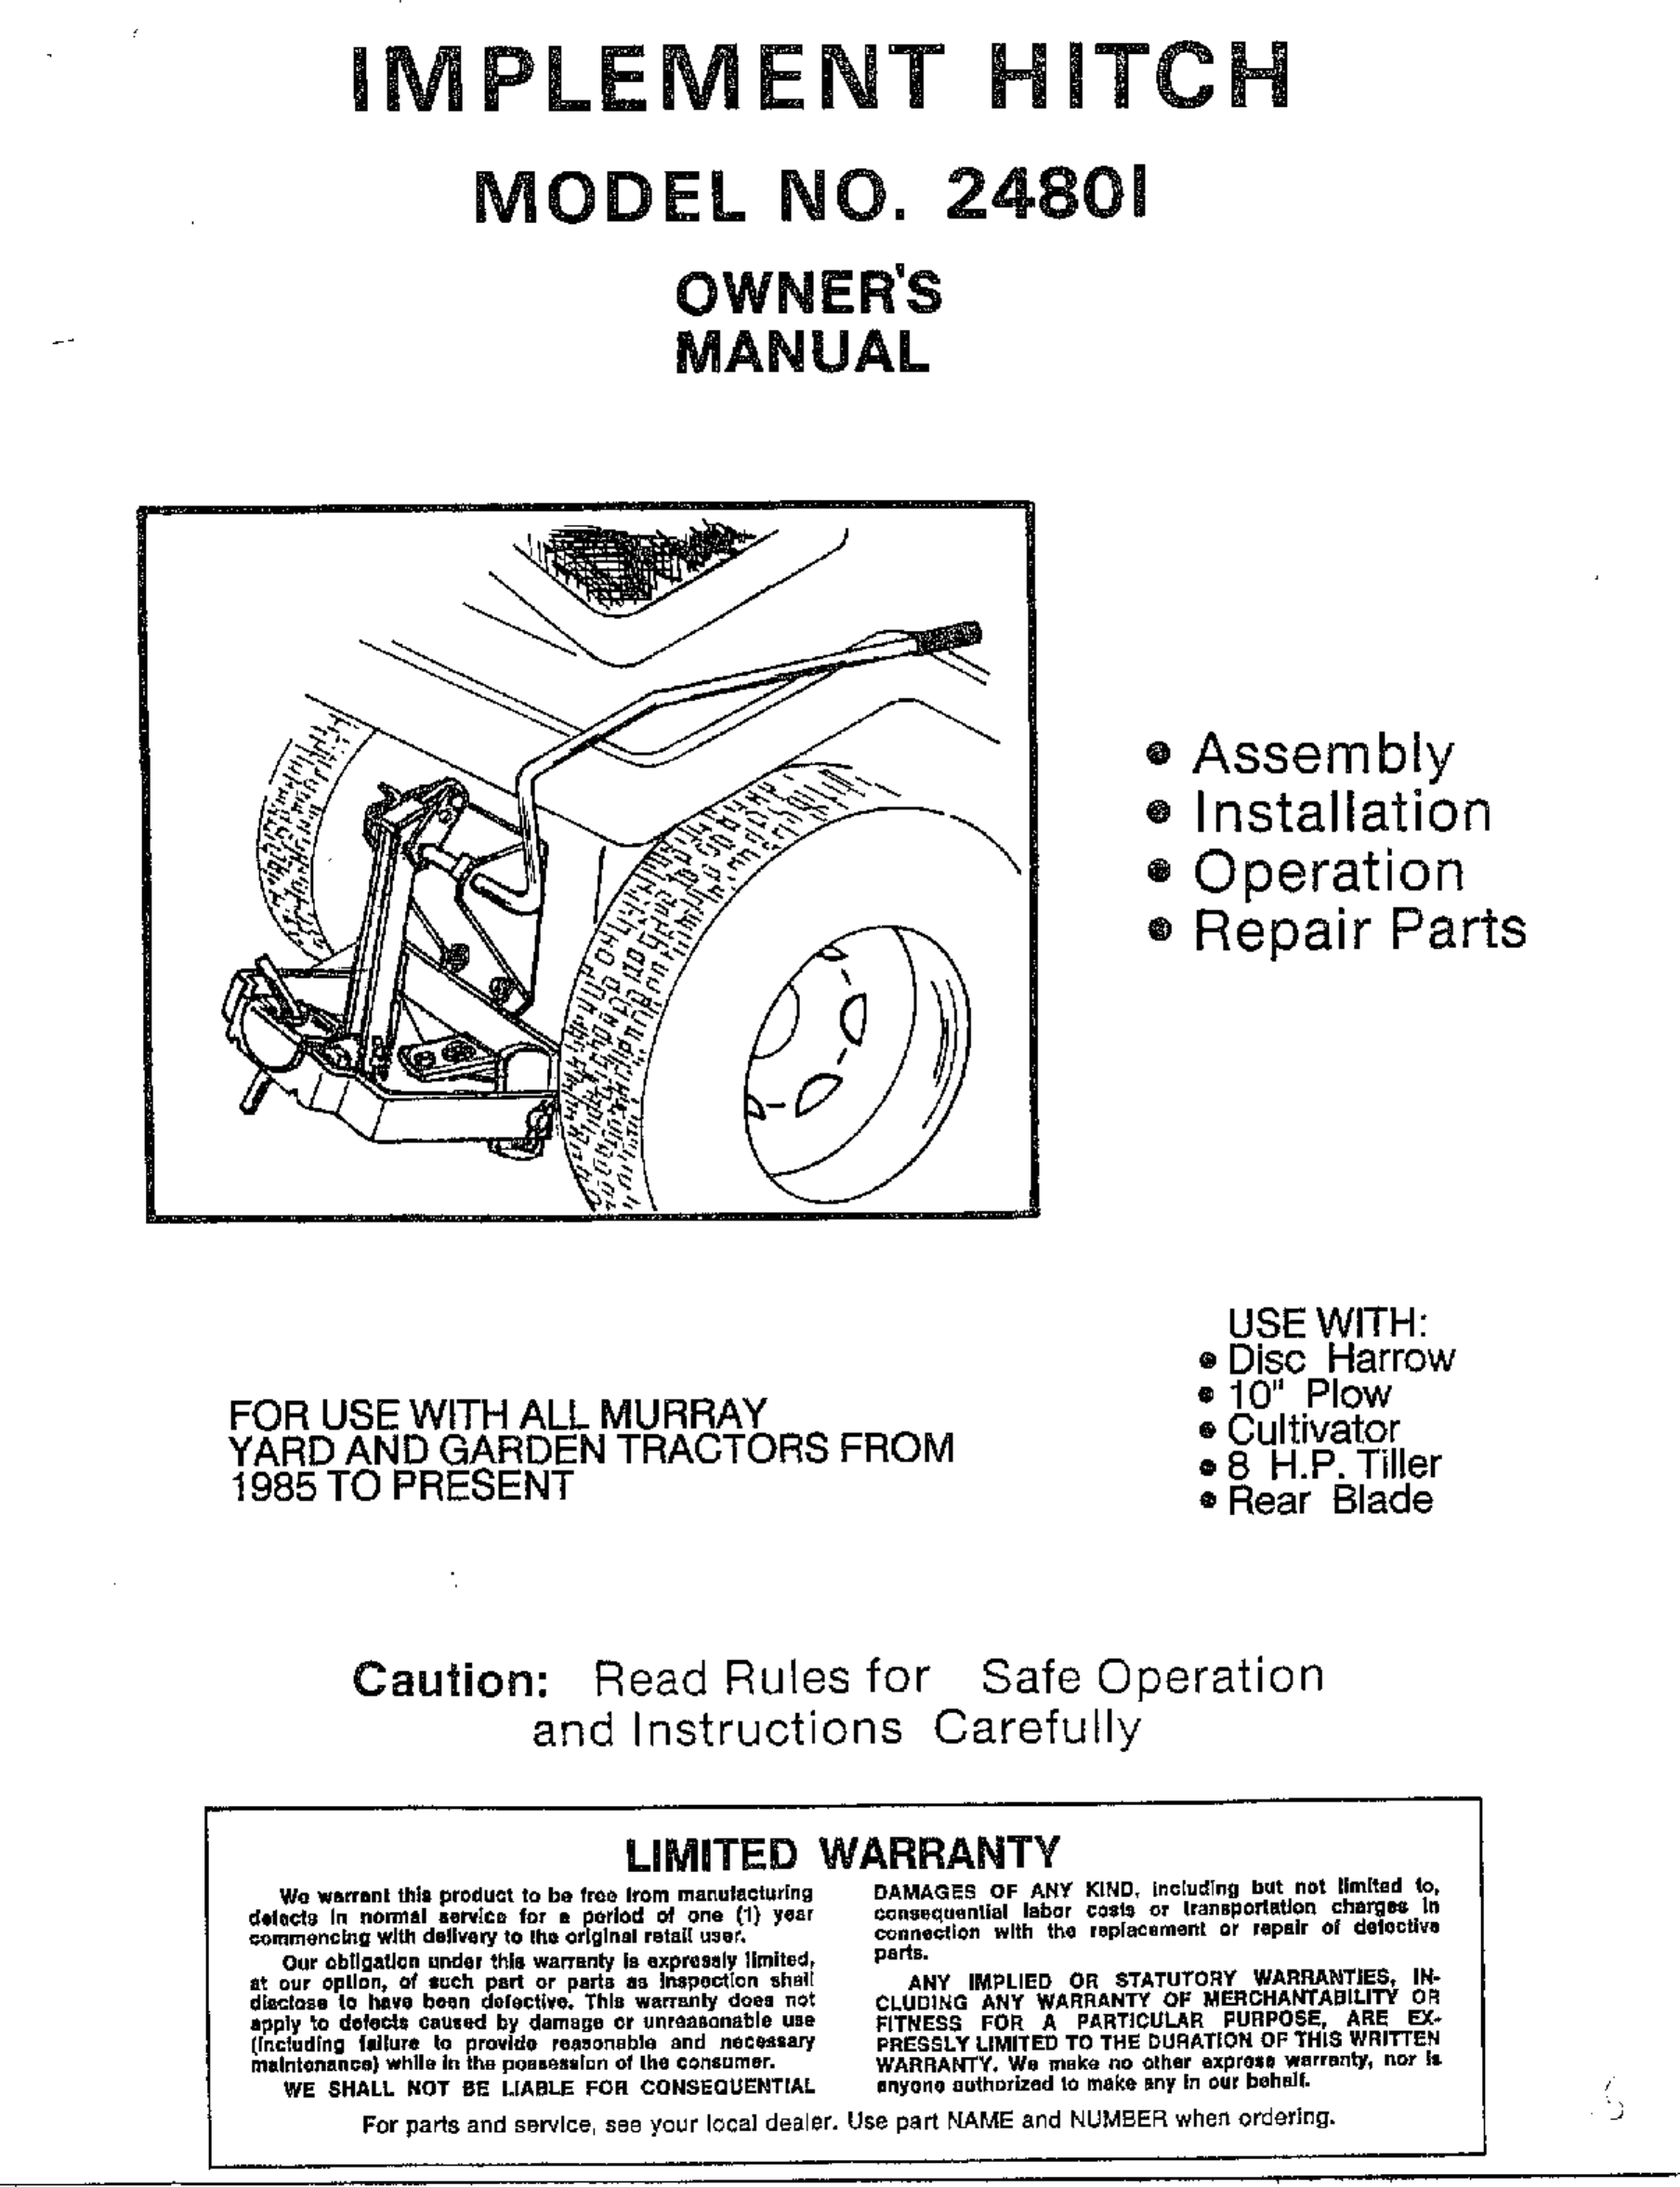 Page 1 of 4 - Murray 24801 User Manual  IMPLEMENT HITCH - Manuals And Guides WL000508